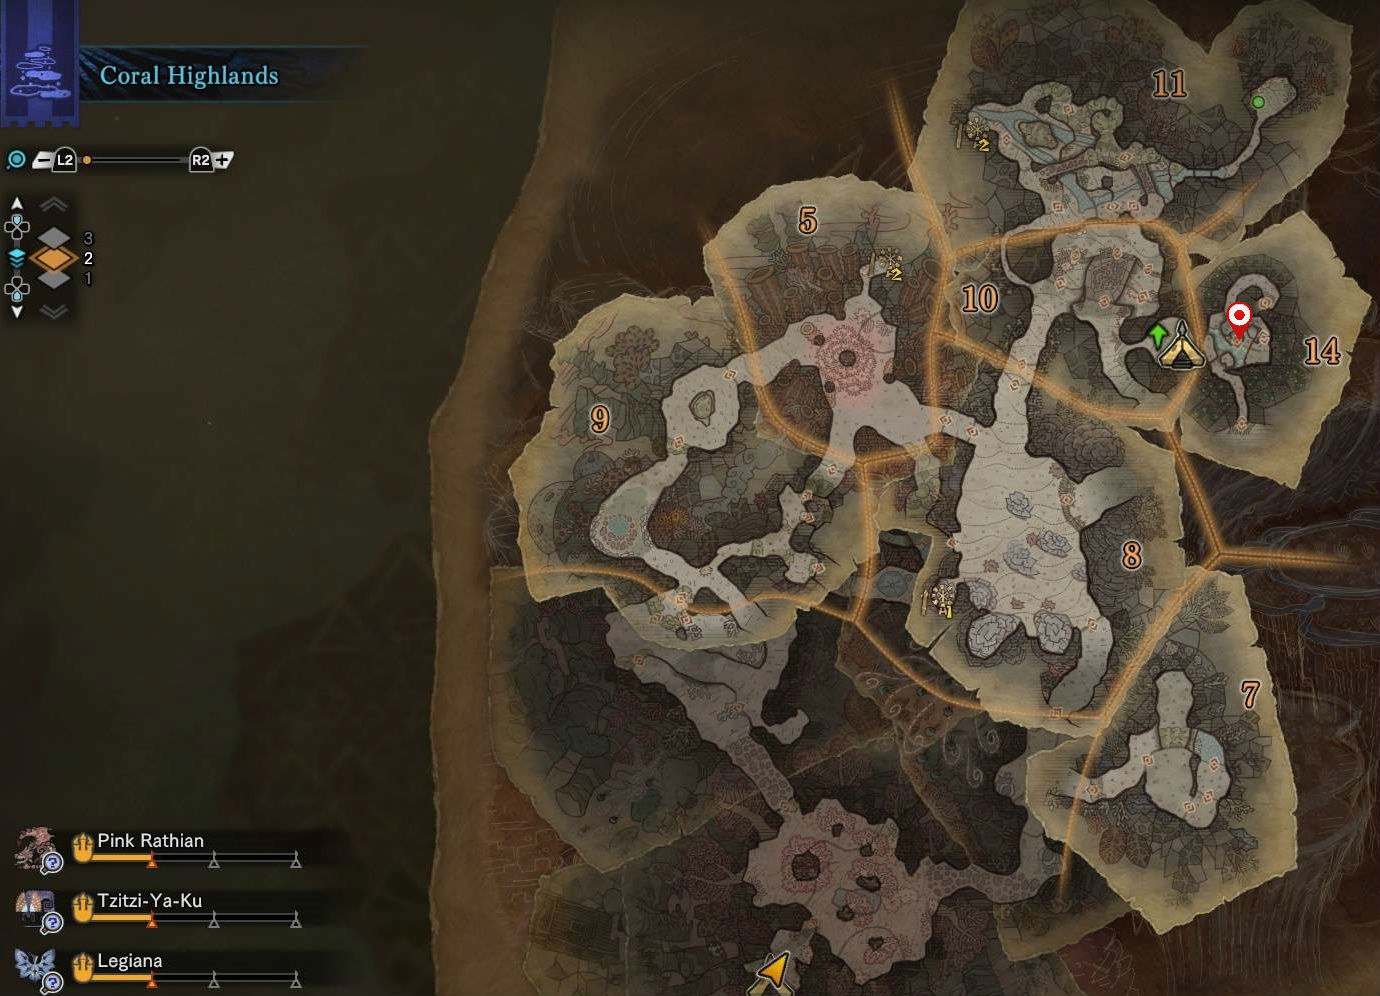 Map of Coral Highlands in MHW with possible location of goldenfish in zone 14 noted